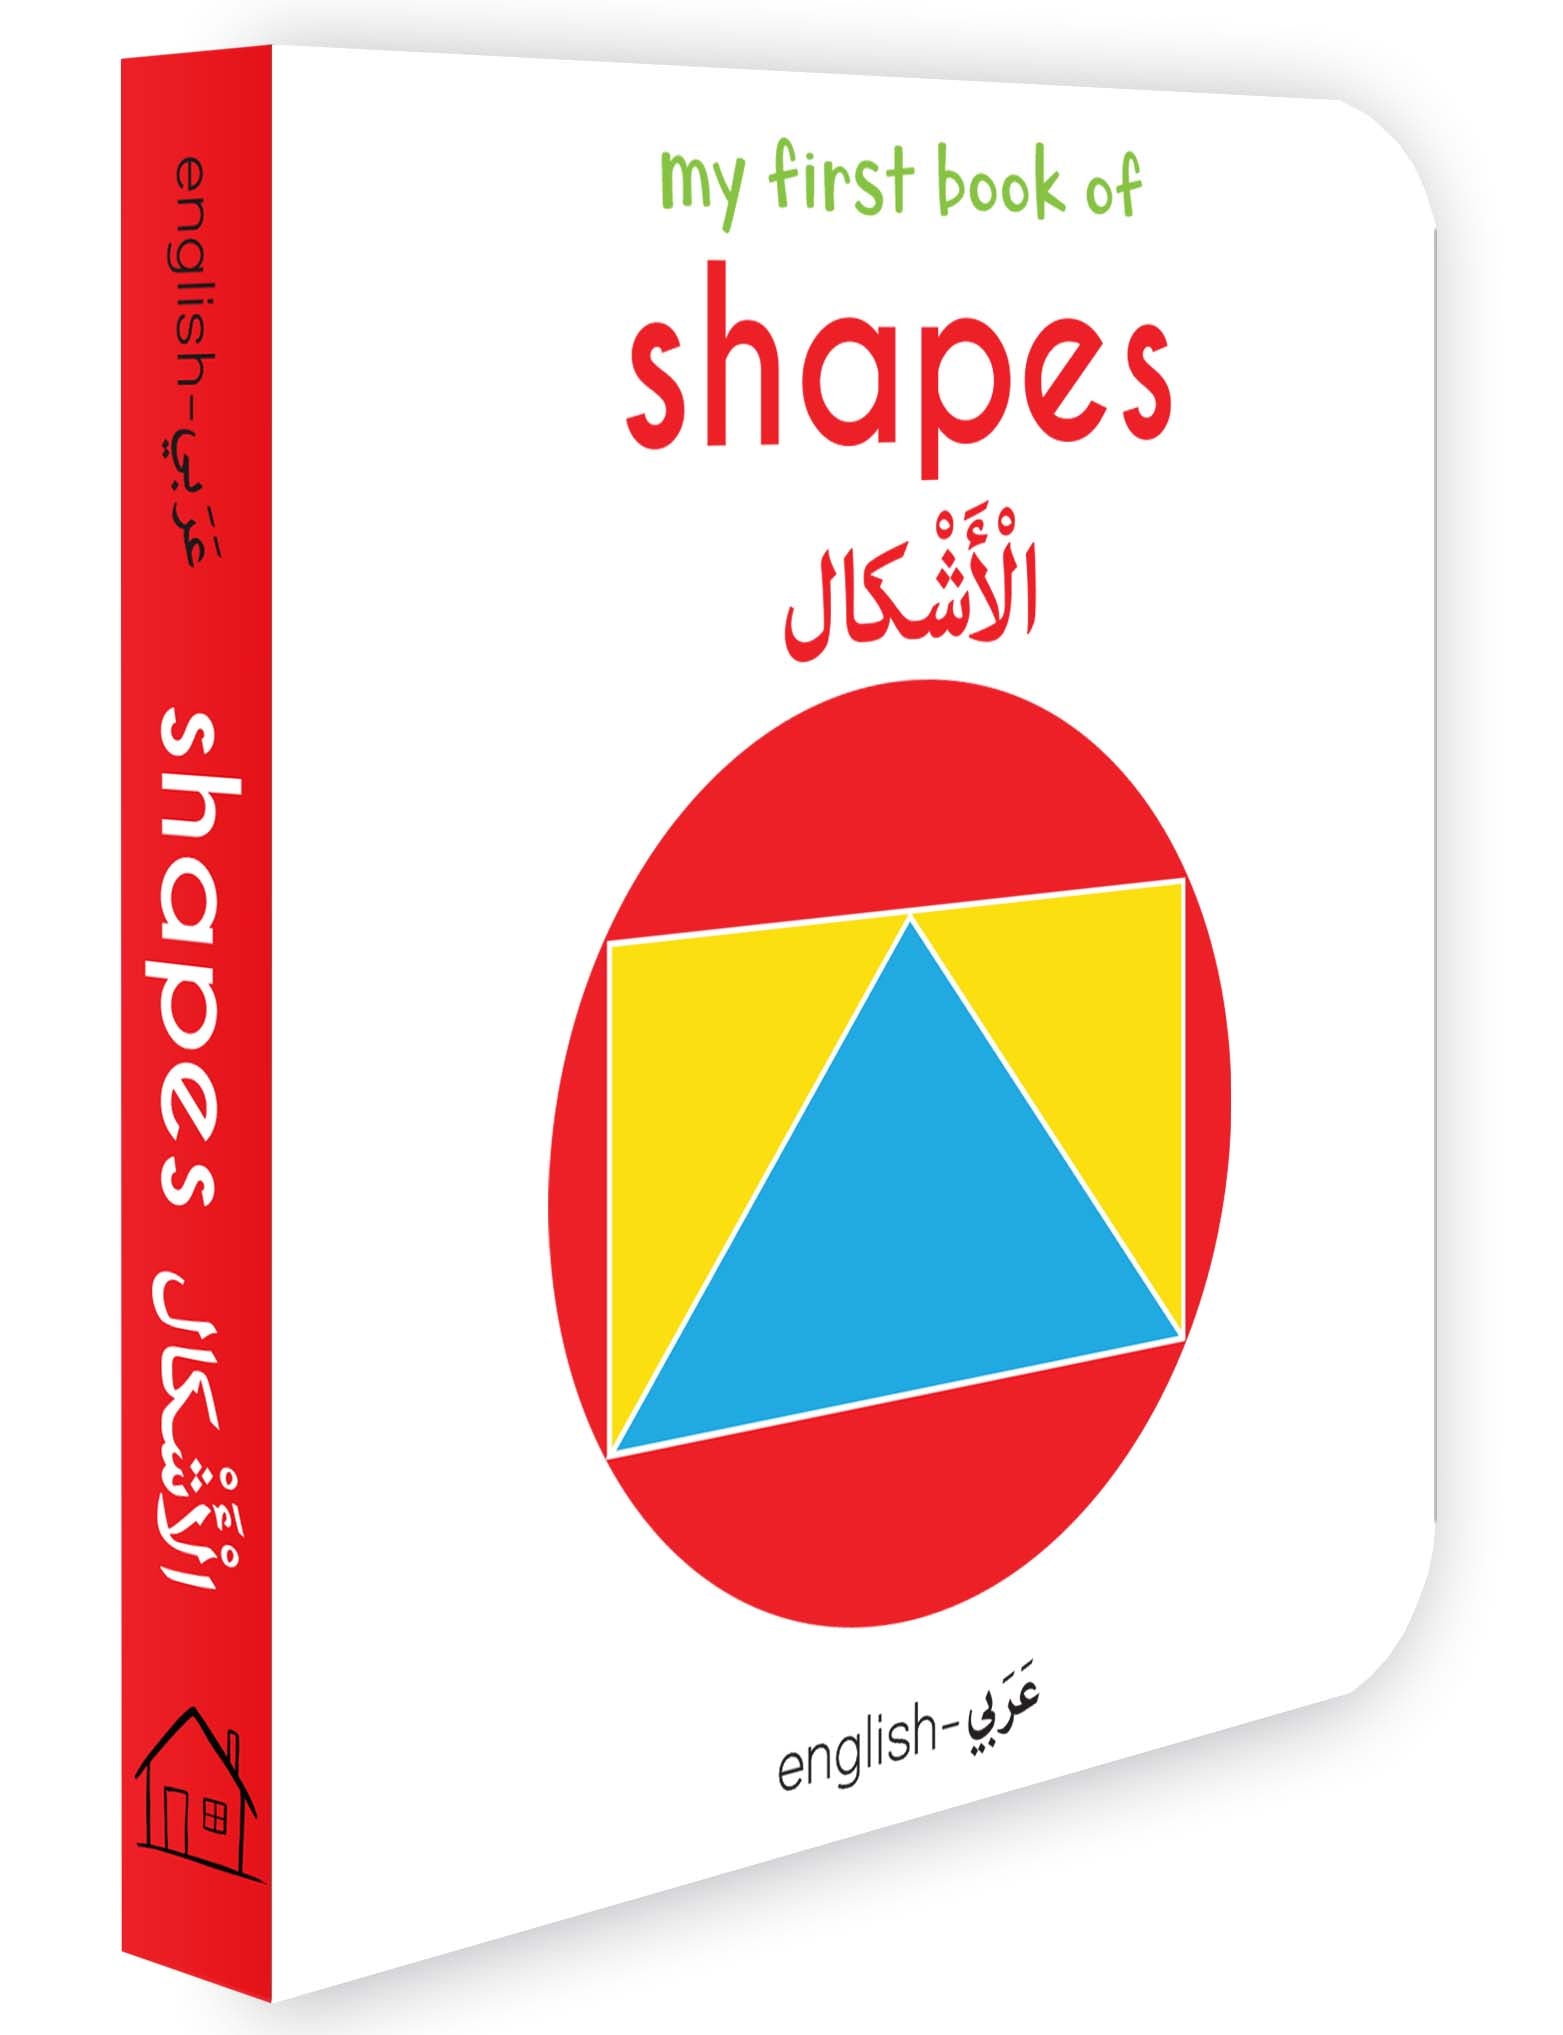 My First Book of Shapes (English-Arabic) - Bilingual Learning Library